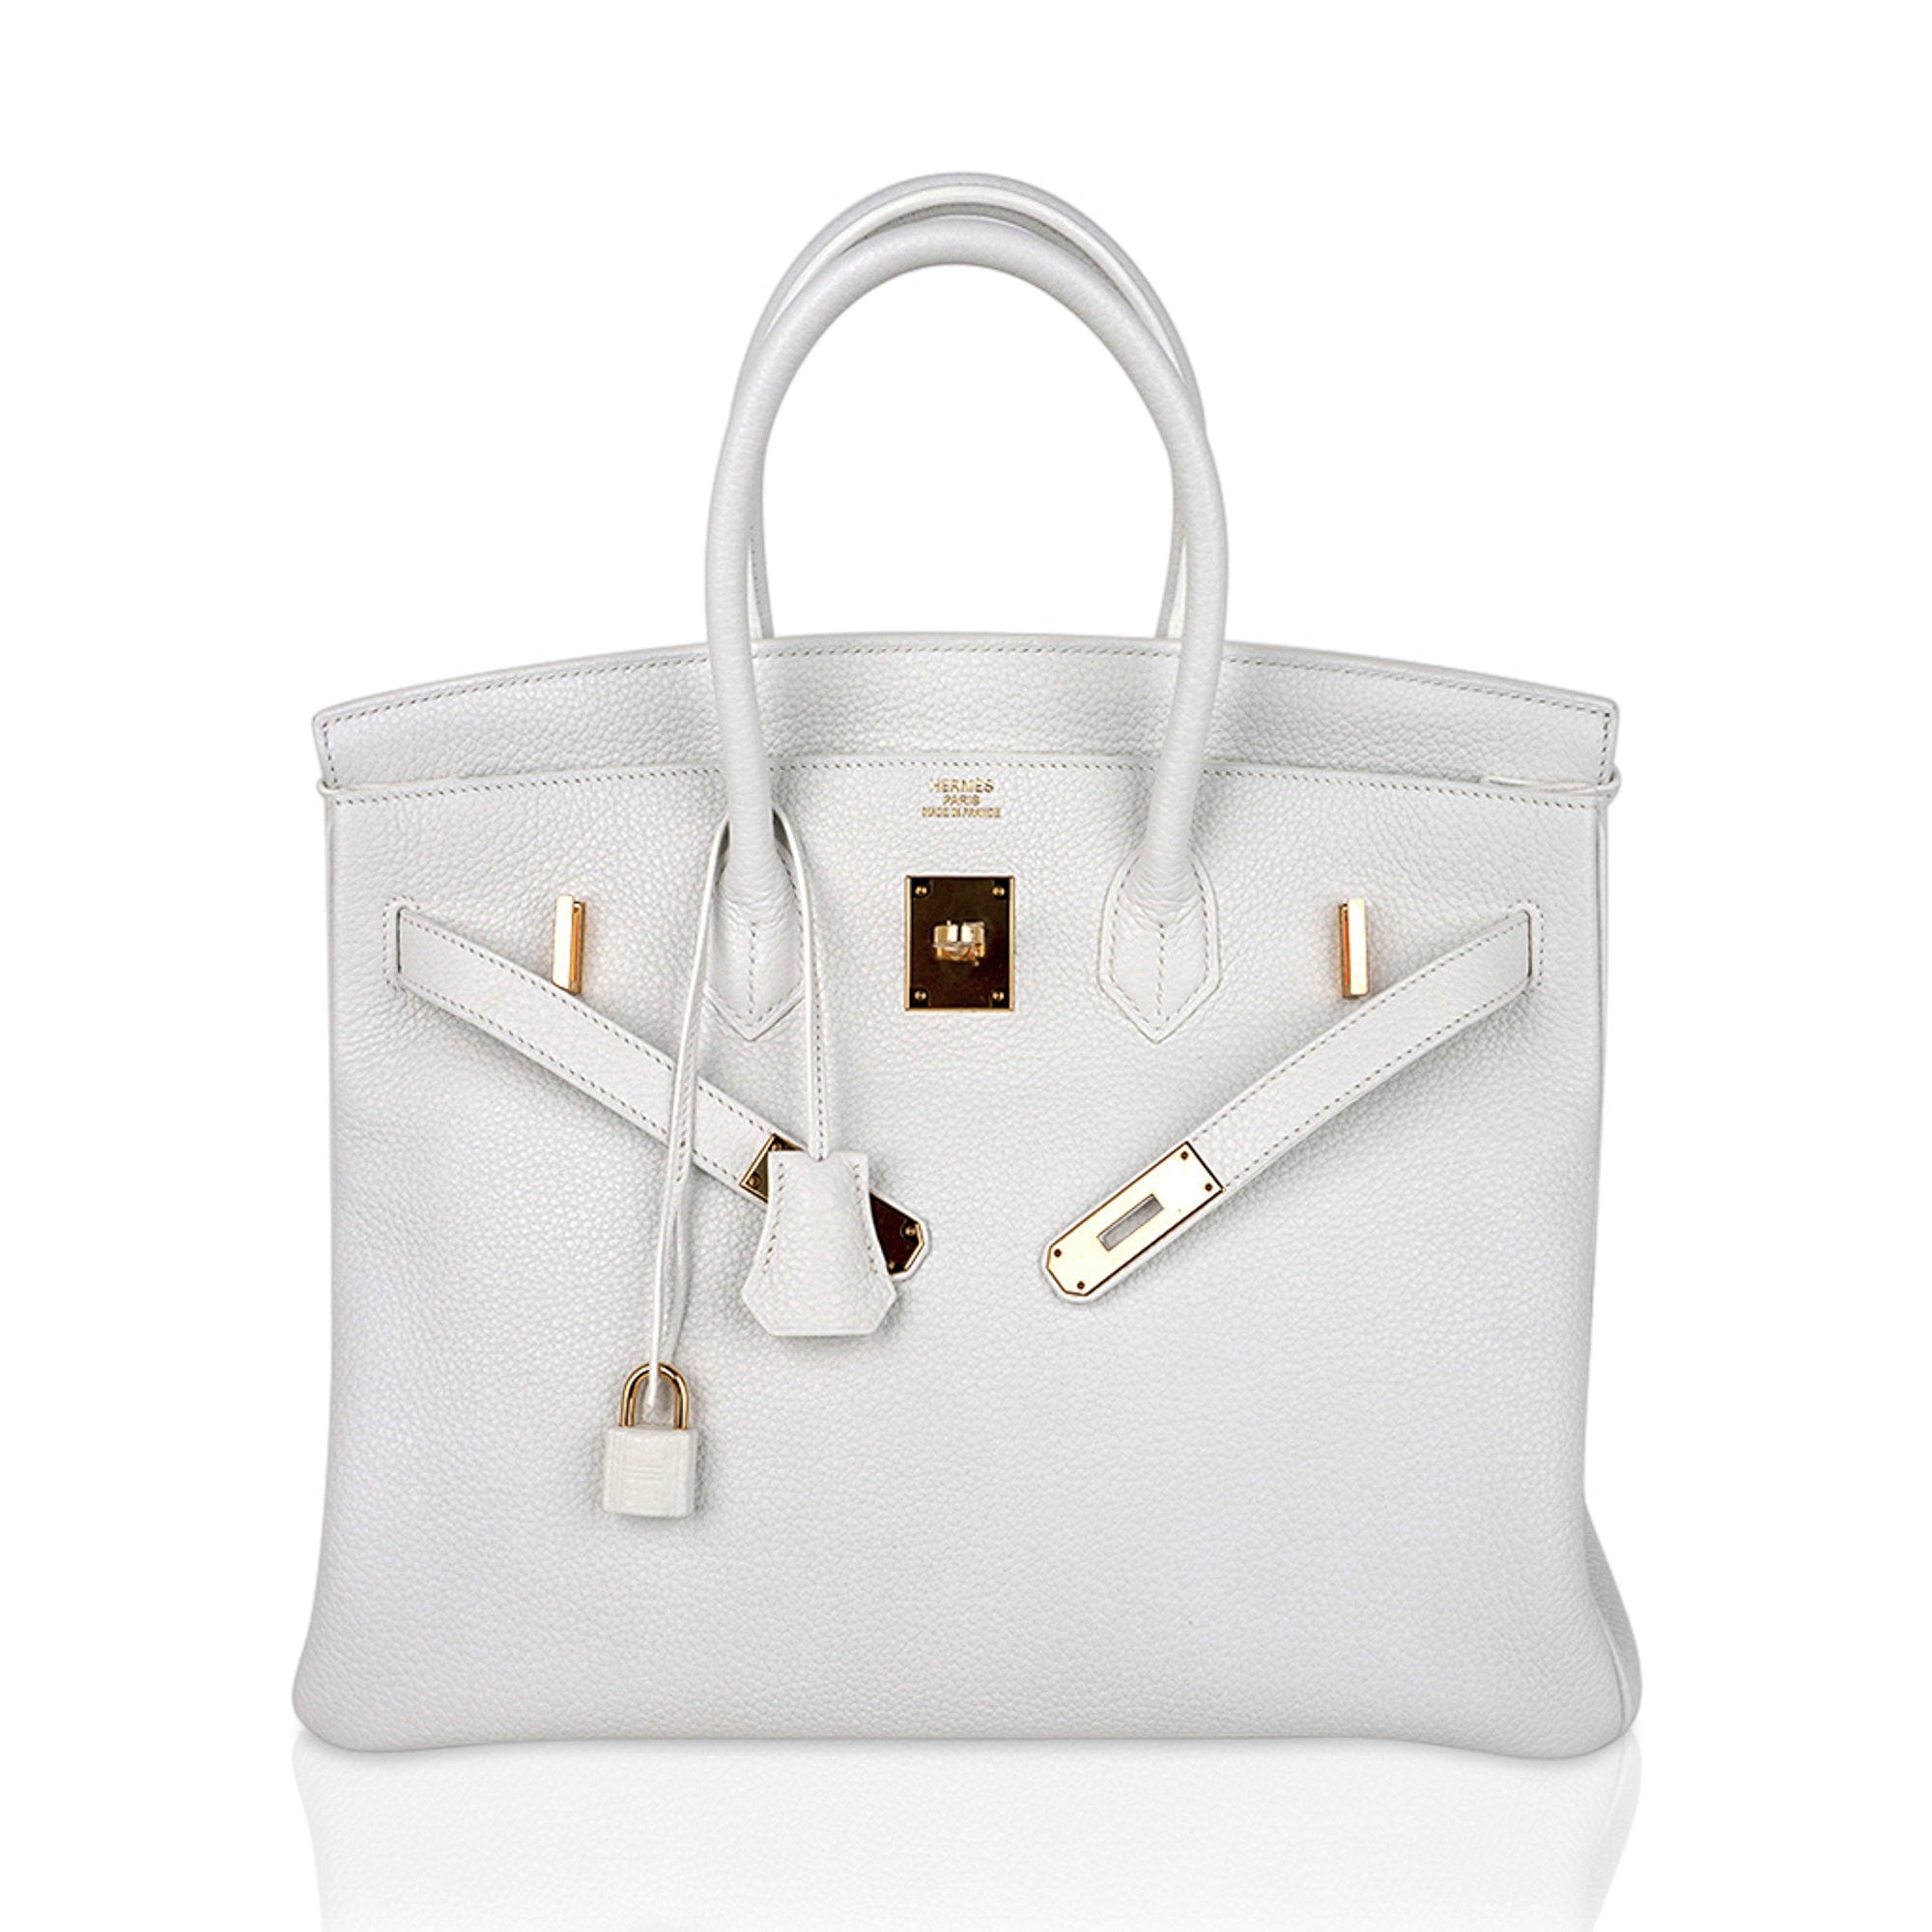 Hermes Birkin 35 Bag White Clemence Leather with Gold Hardware